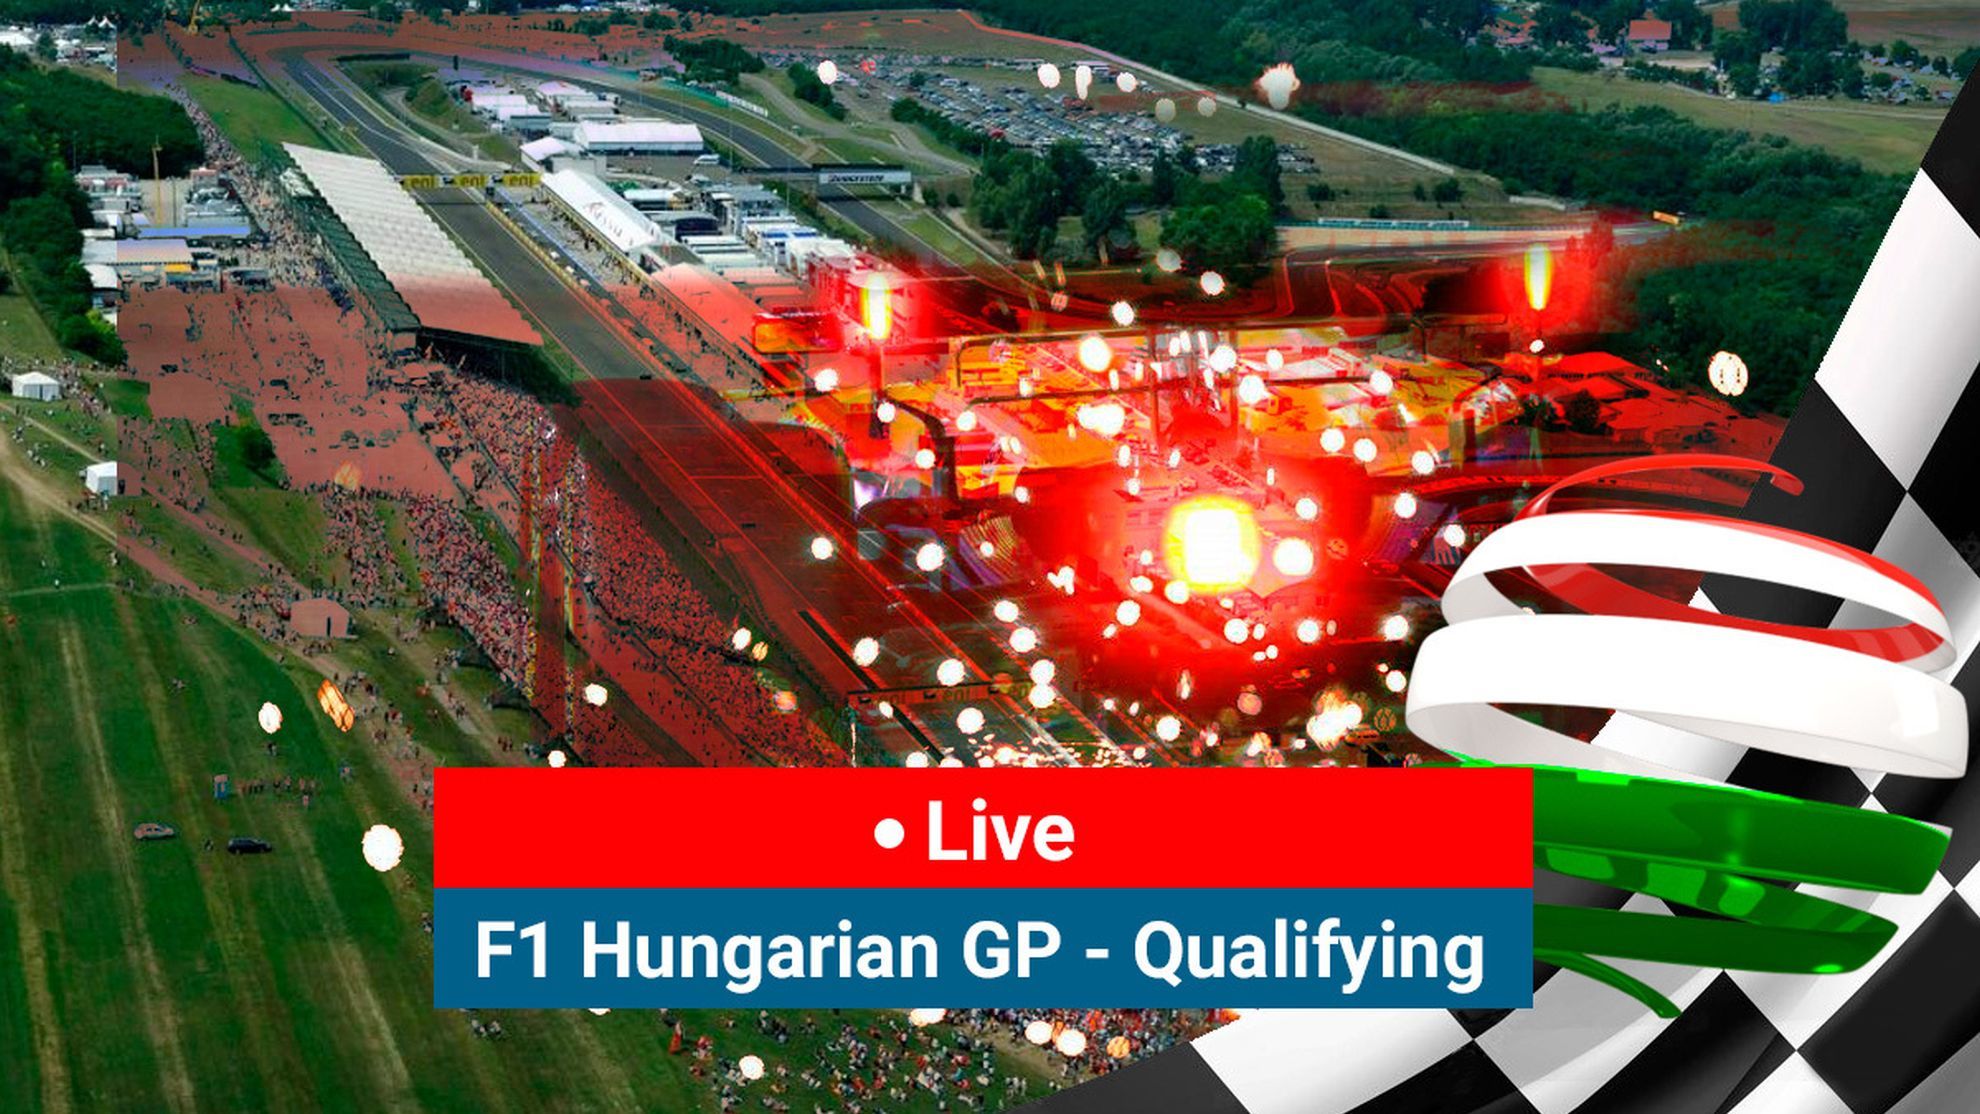 Formula 1s 2022 Hungarian Grand Prix Qualifying Russell pole and full starting grid